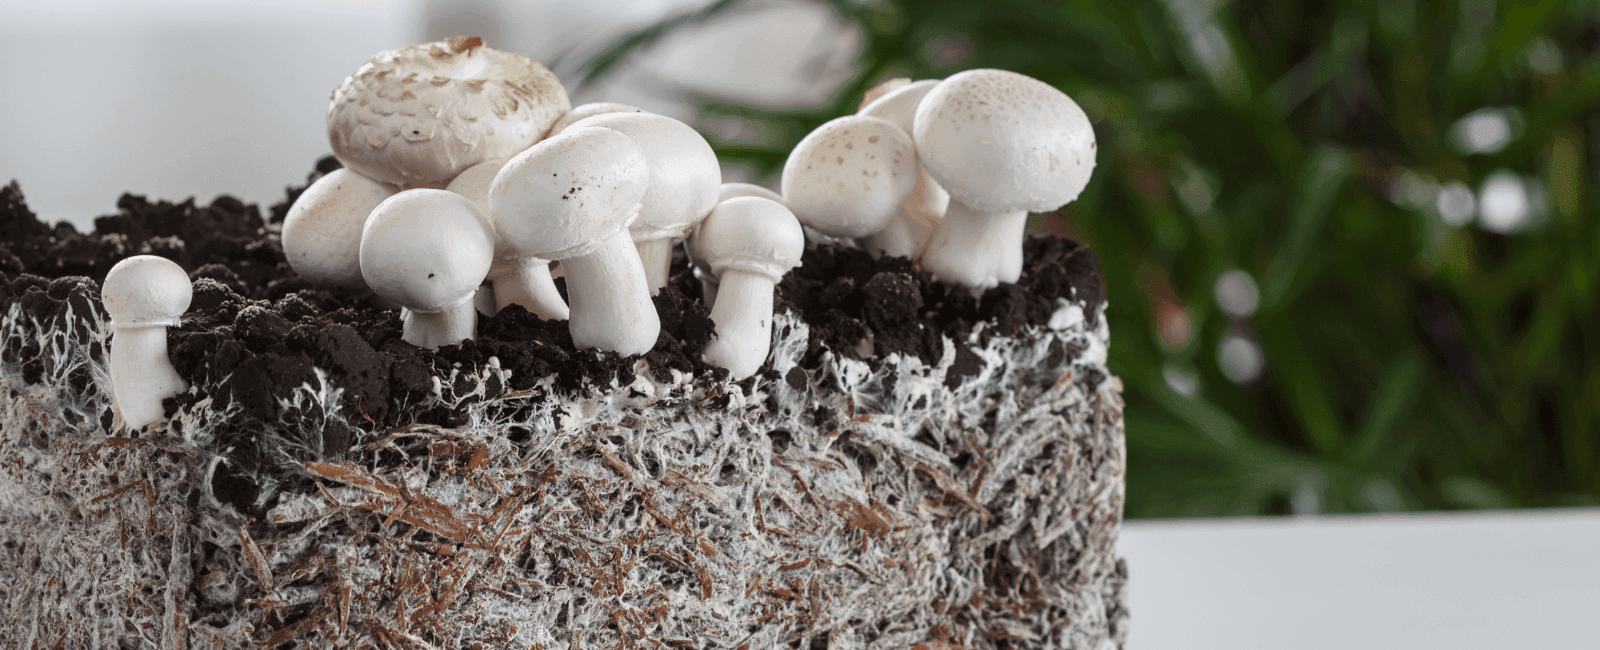 13 of the Best Mushrooms to Start Growing at Home